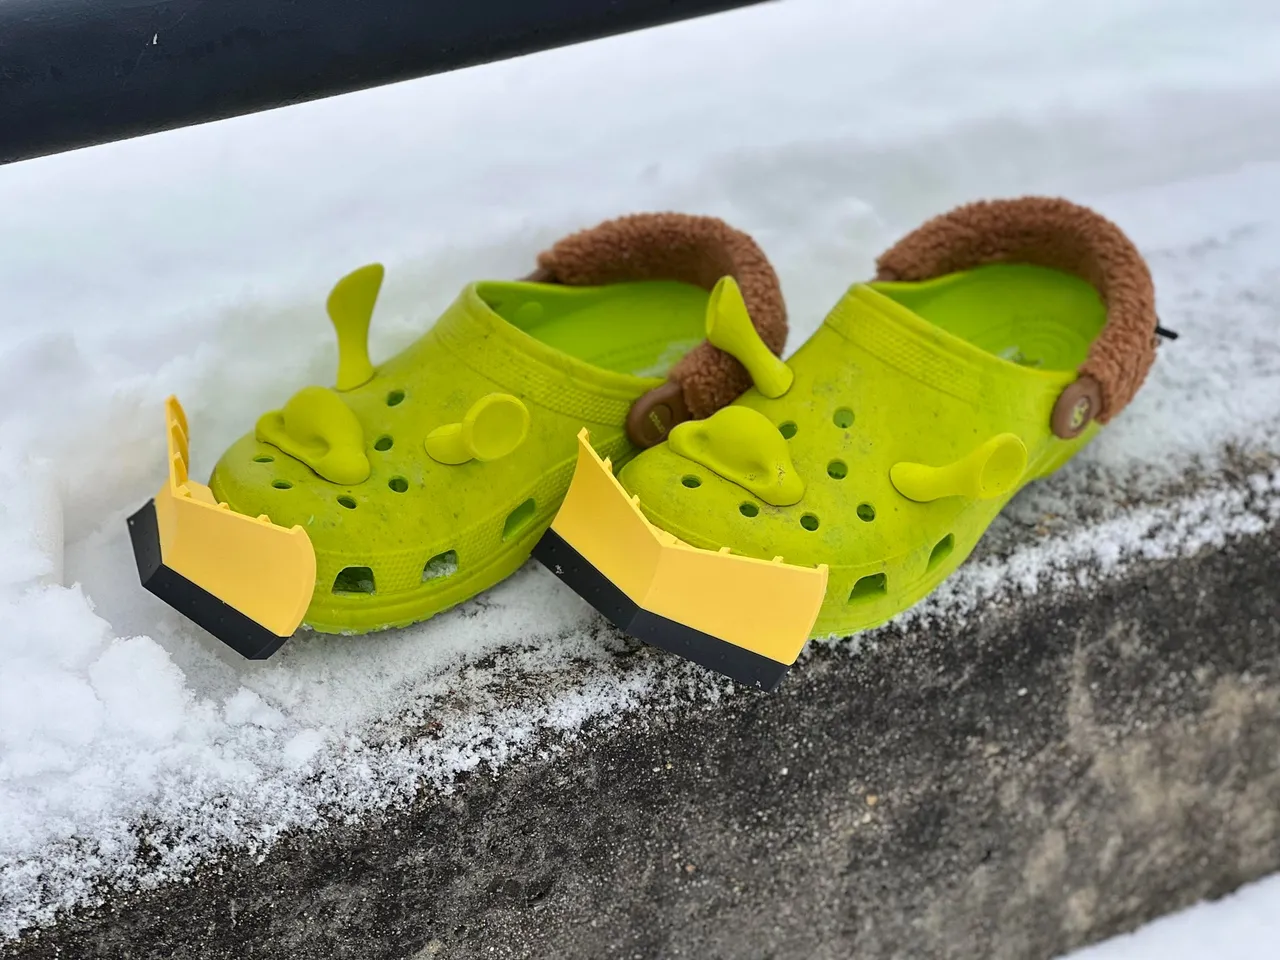 These Croc Snow Plow Attachments Help You Wear Your Crocs Through